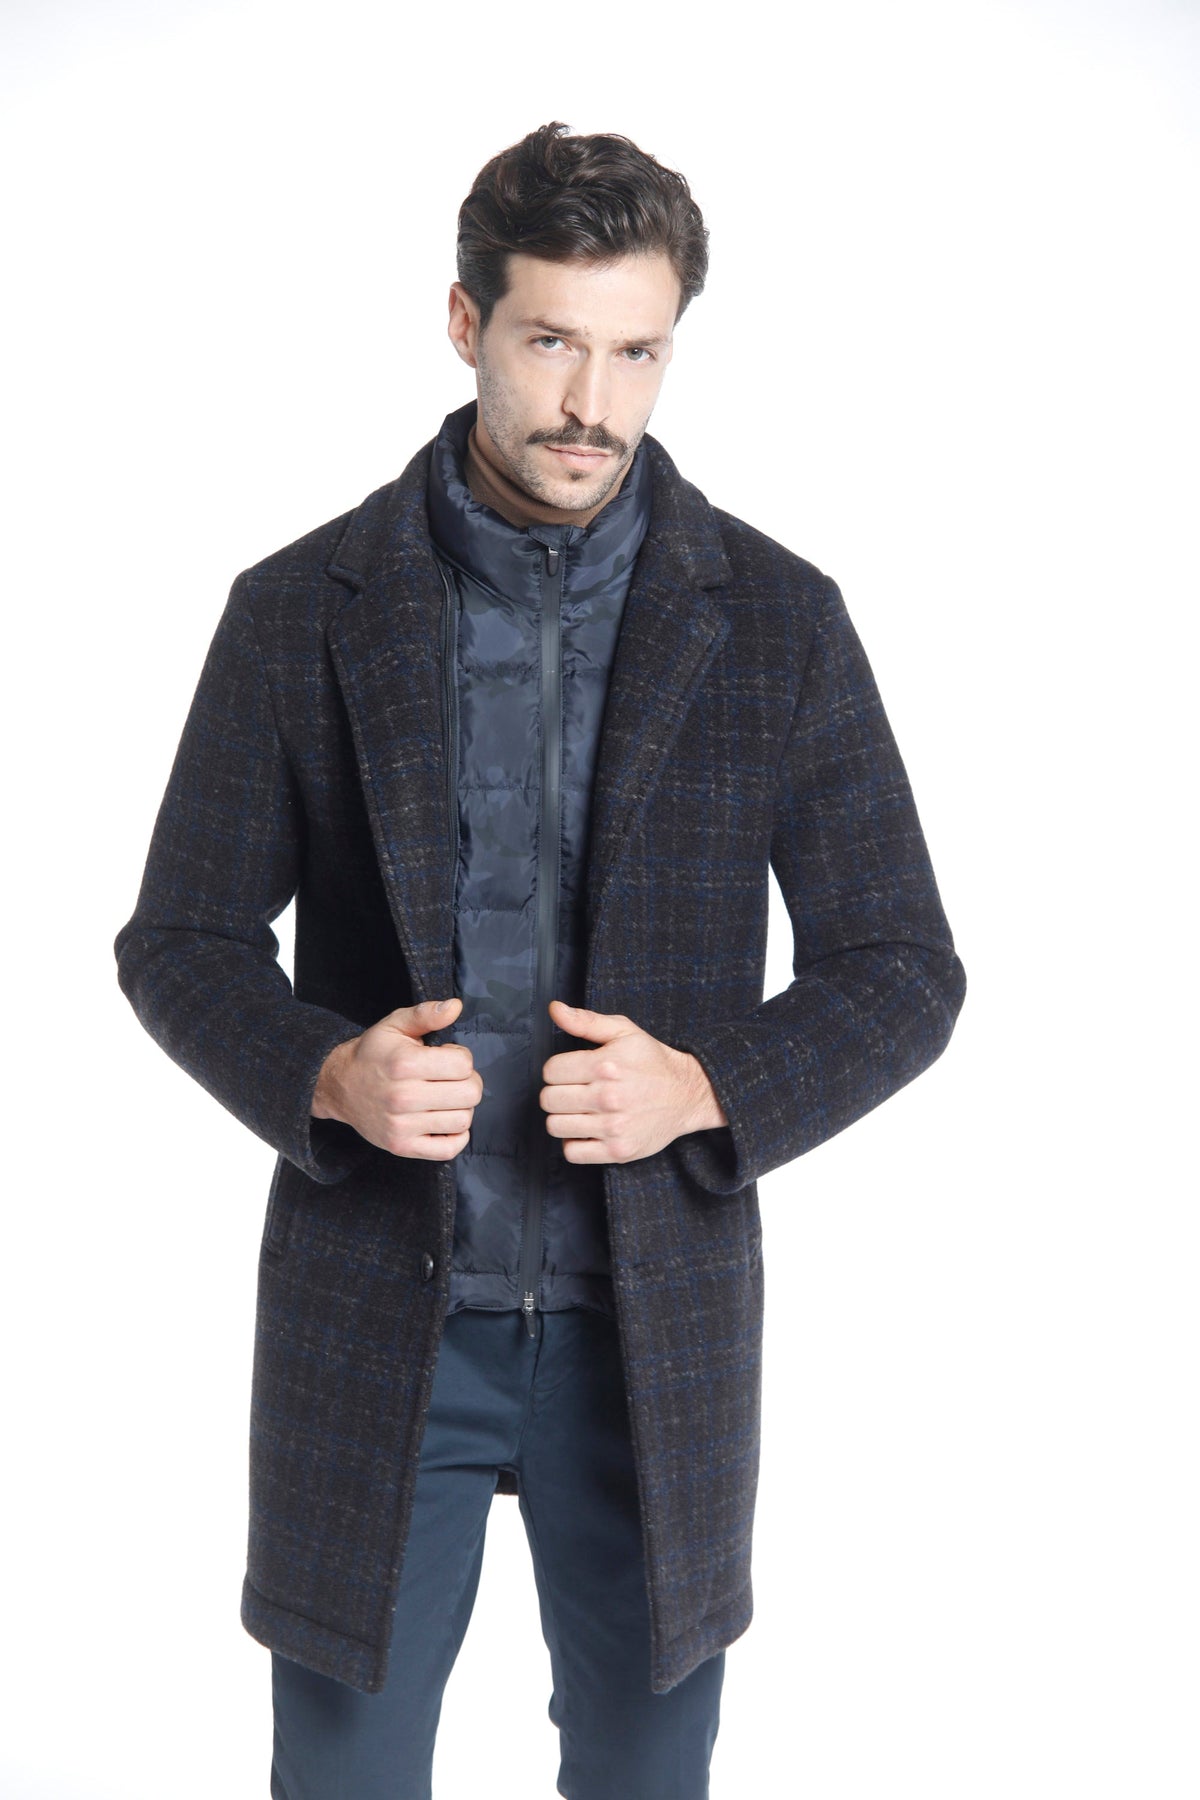 Los Angeles man wool cloth coat with shaded galles pattern, Mason's